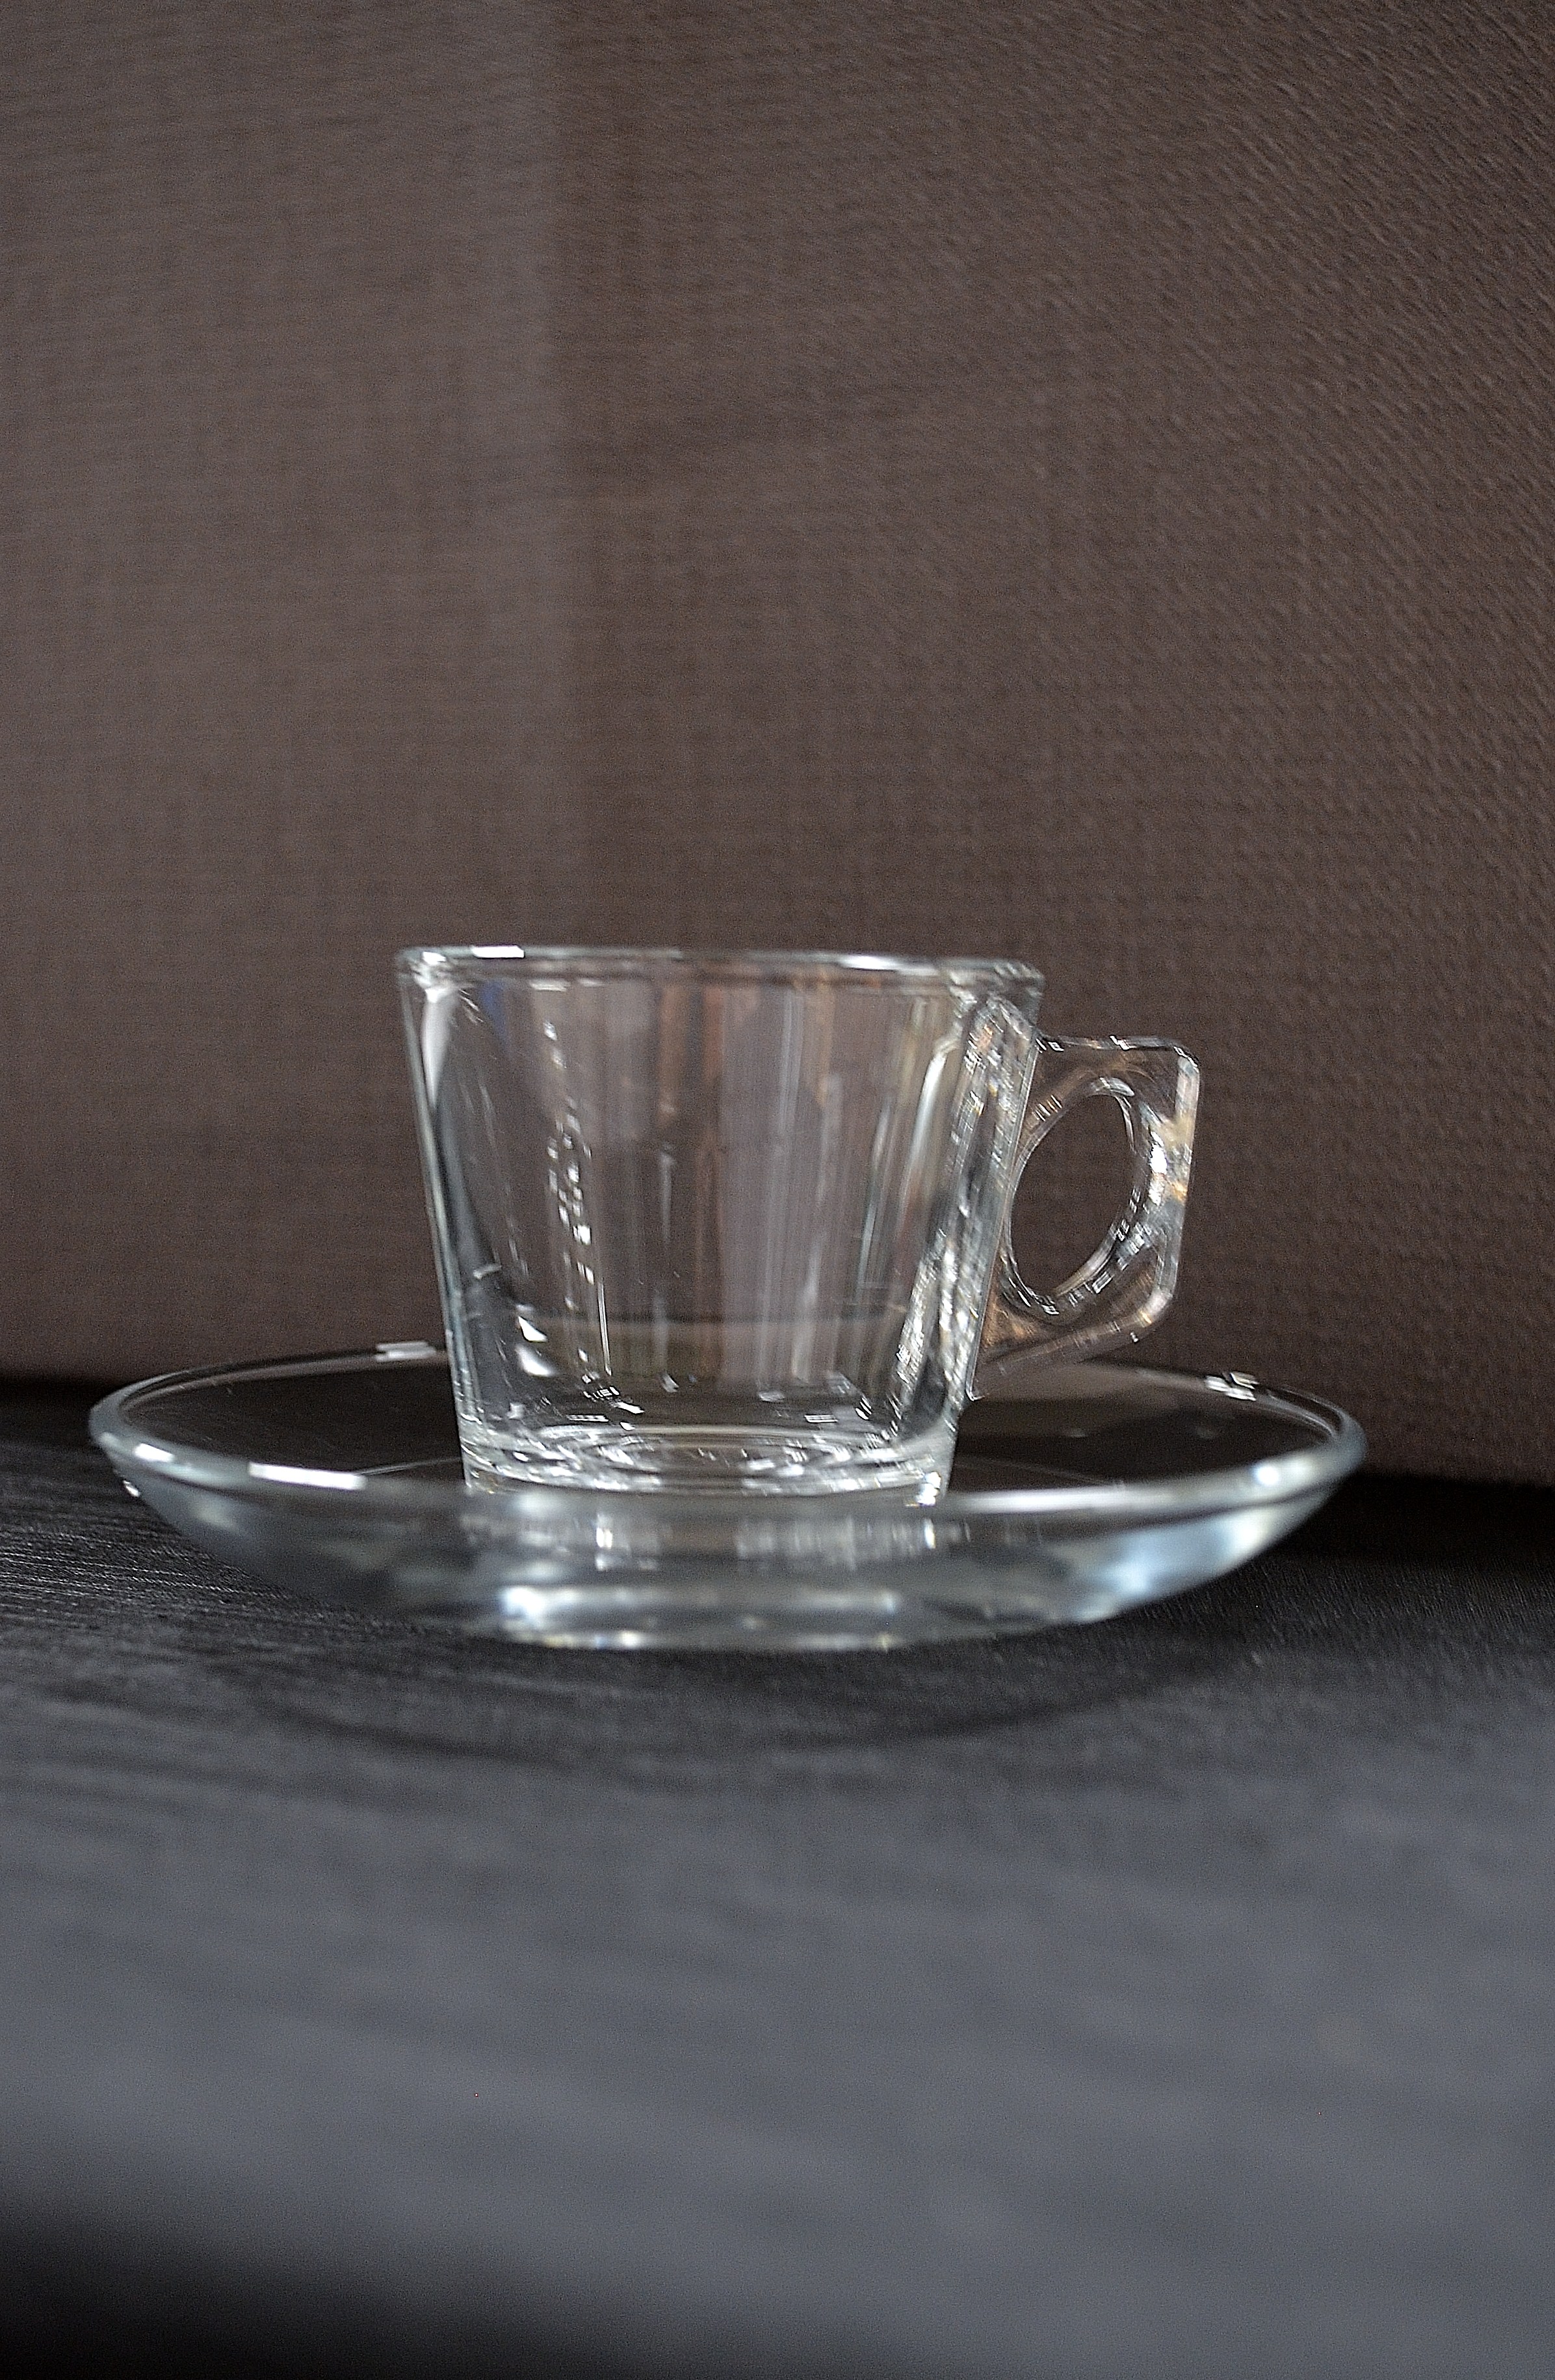 GLASS ESPRESSO CUP & SAUCER SET (Cup 60 cents / Saucer 40 cents if rented separate) 2 oz